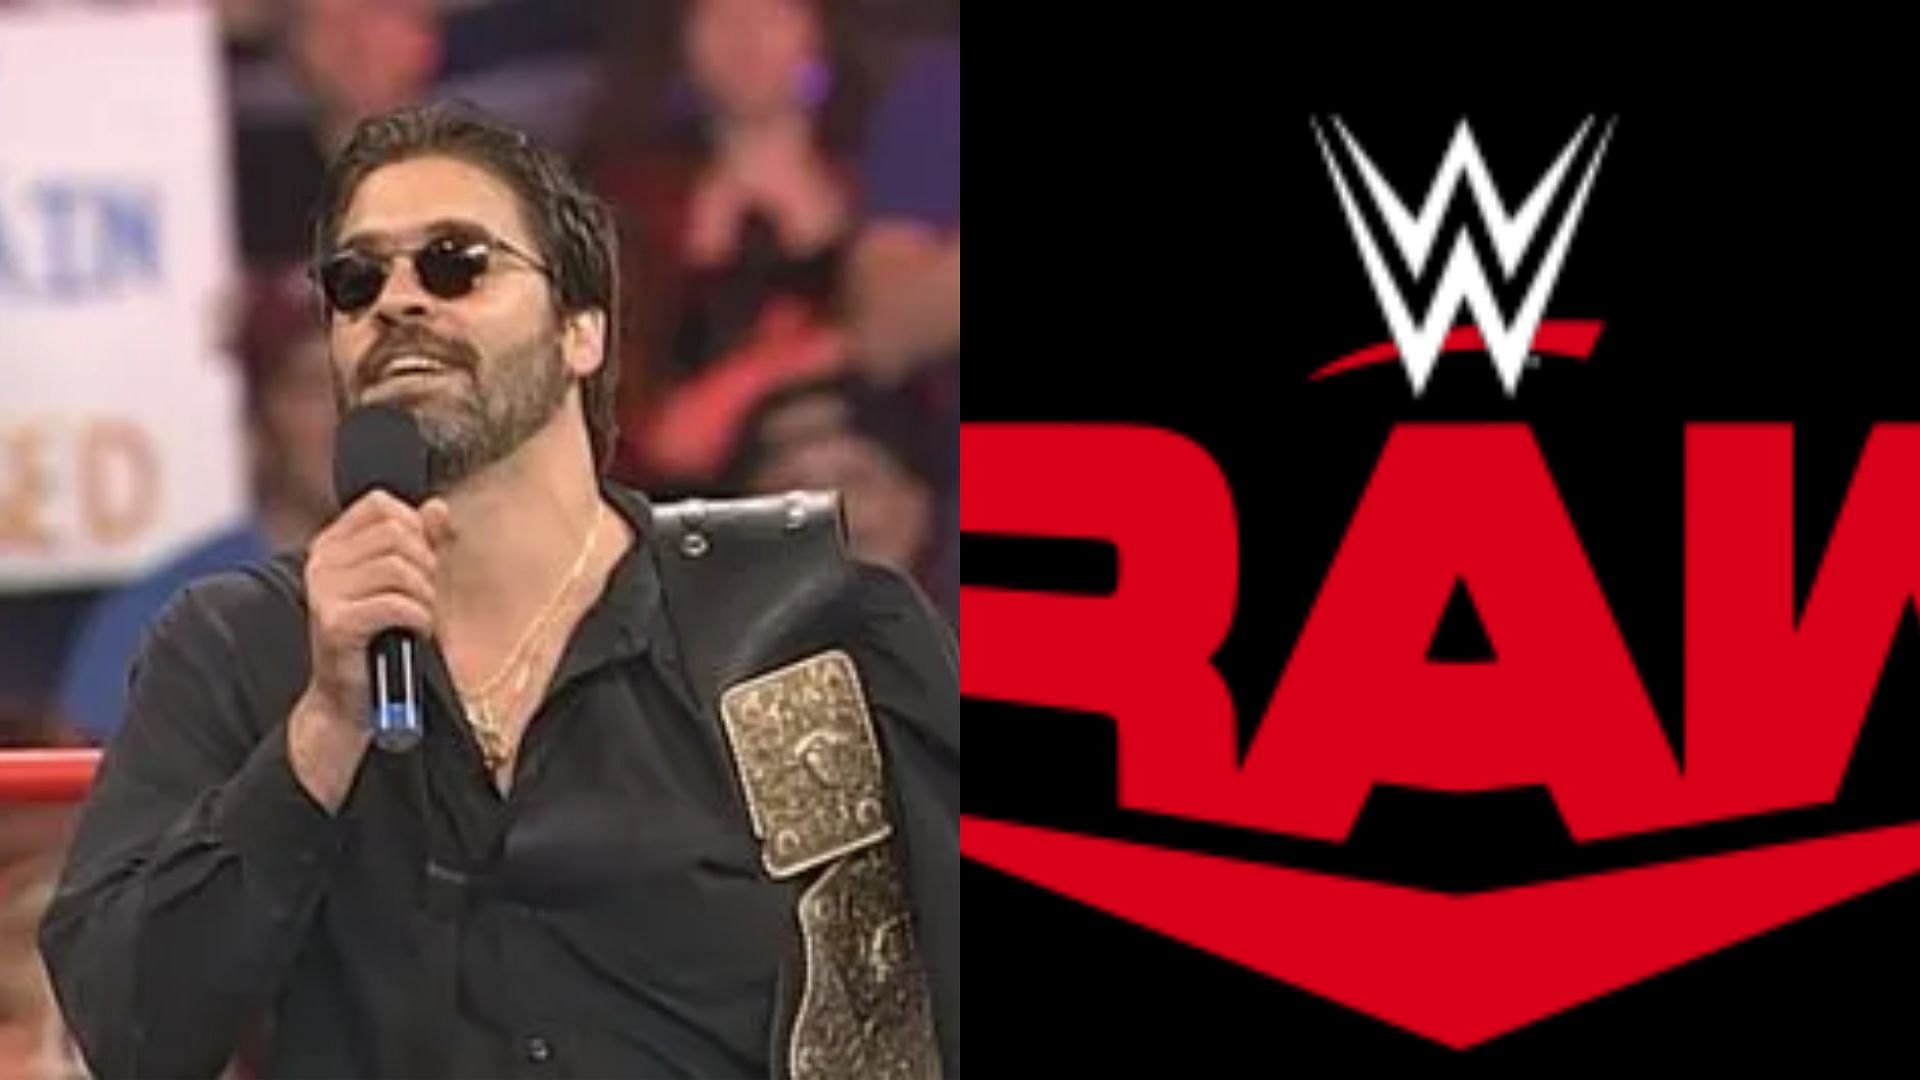 Vince Russo was critical of the RAW stars